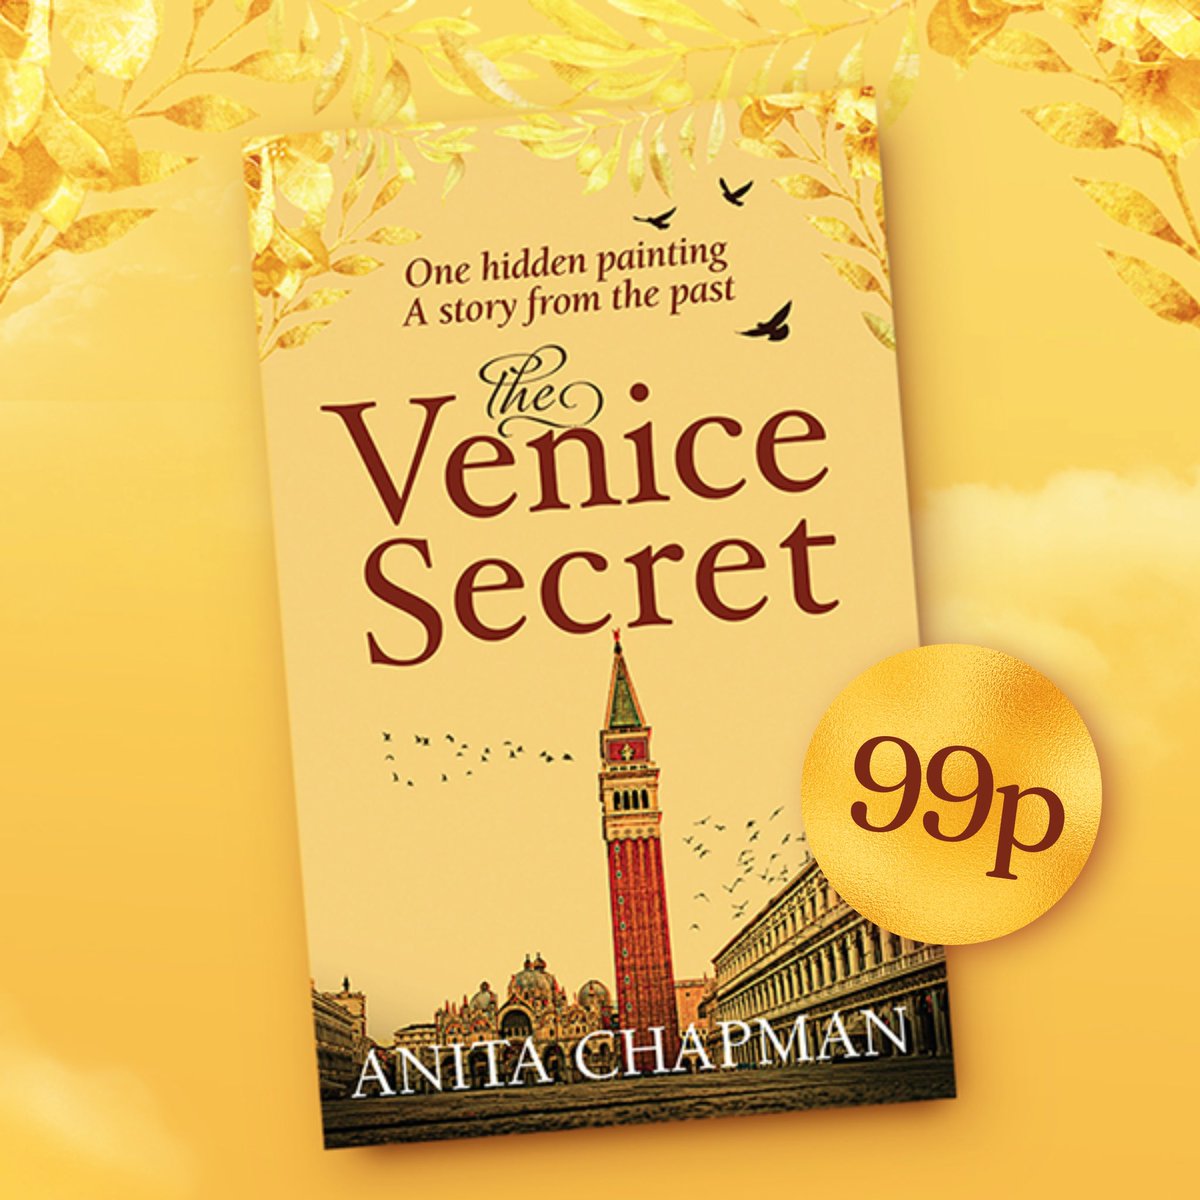 L👀king for a rainy day read? ☔️ ✨The Venice Secret is out now as ebook (99p), Prime Reading, Kindle Unlimited & paperback One hidden painting 🎨 A story from the past 📚 amzn.to/3ES3oGy